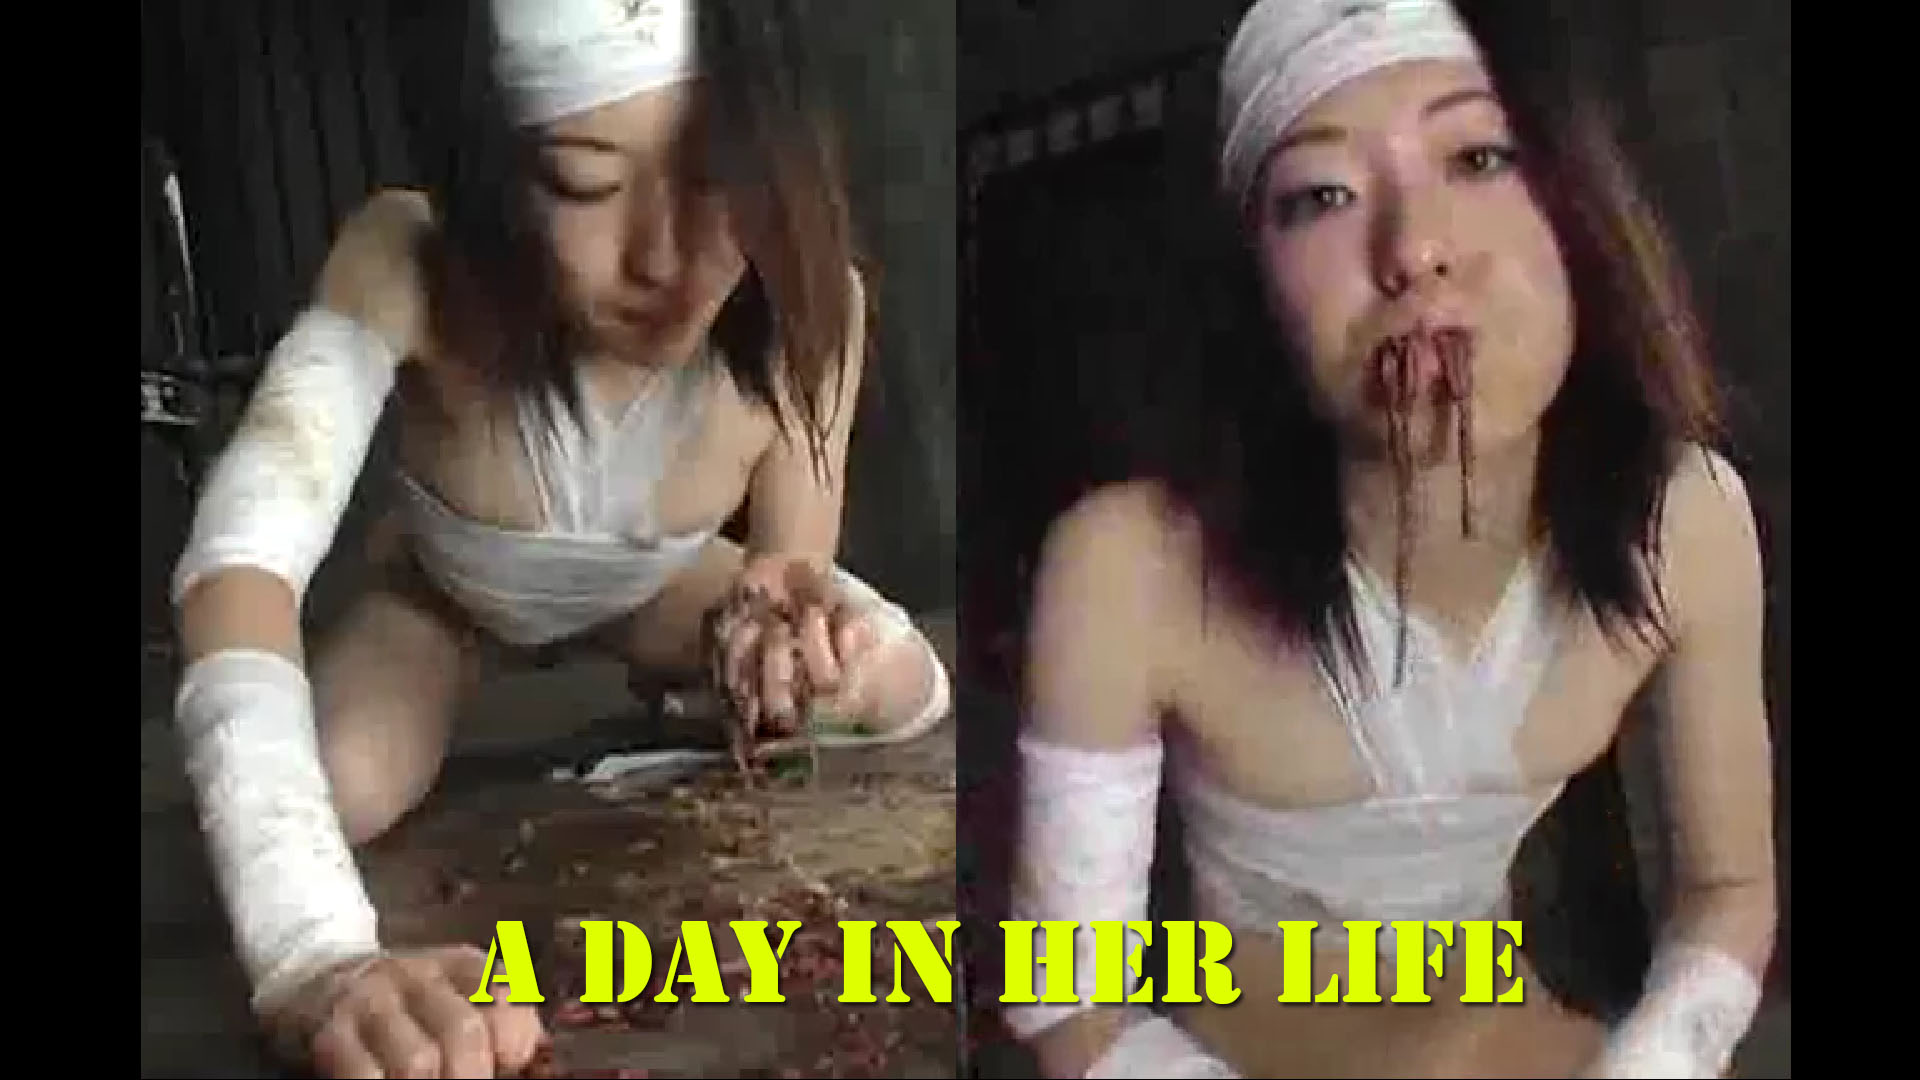 Filthy girl with Insects Fetish (Eating worms n Puking)